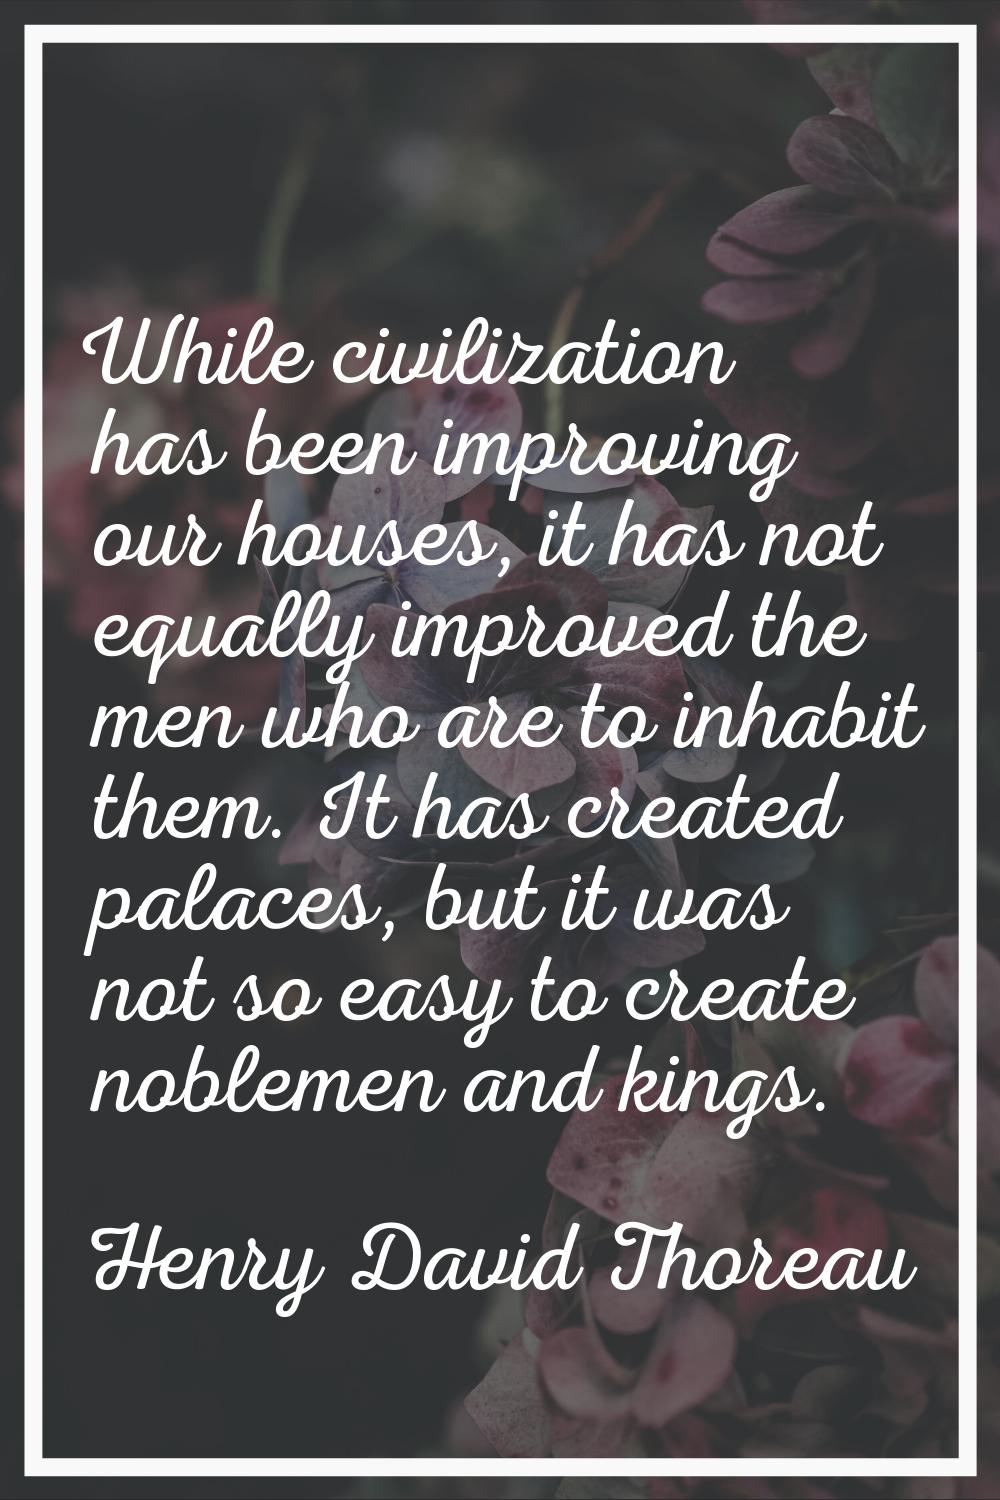 While civilization has been improving our houses, it has not equally improved the men who are to in